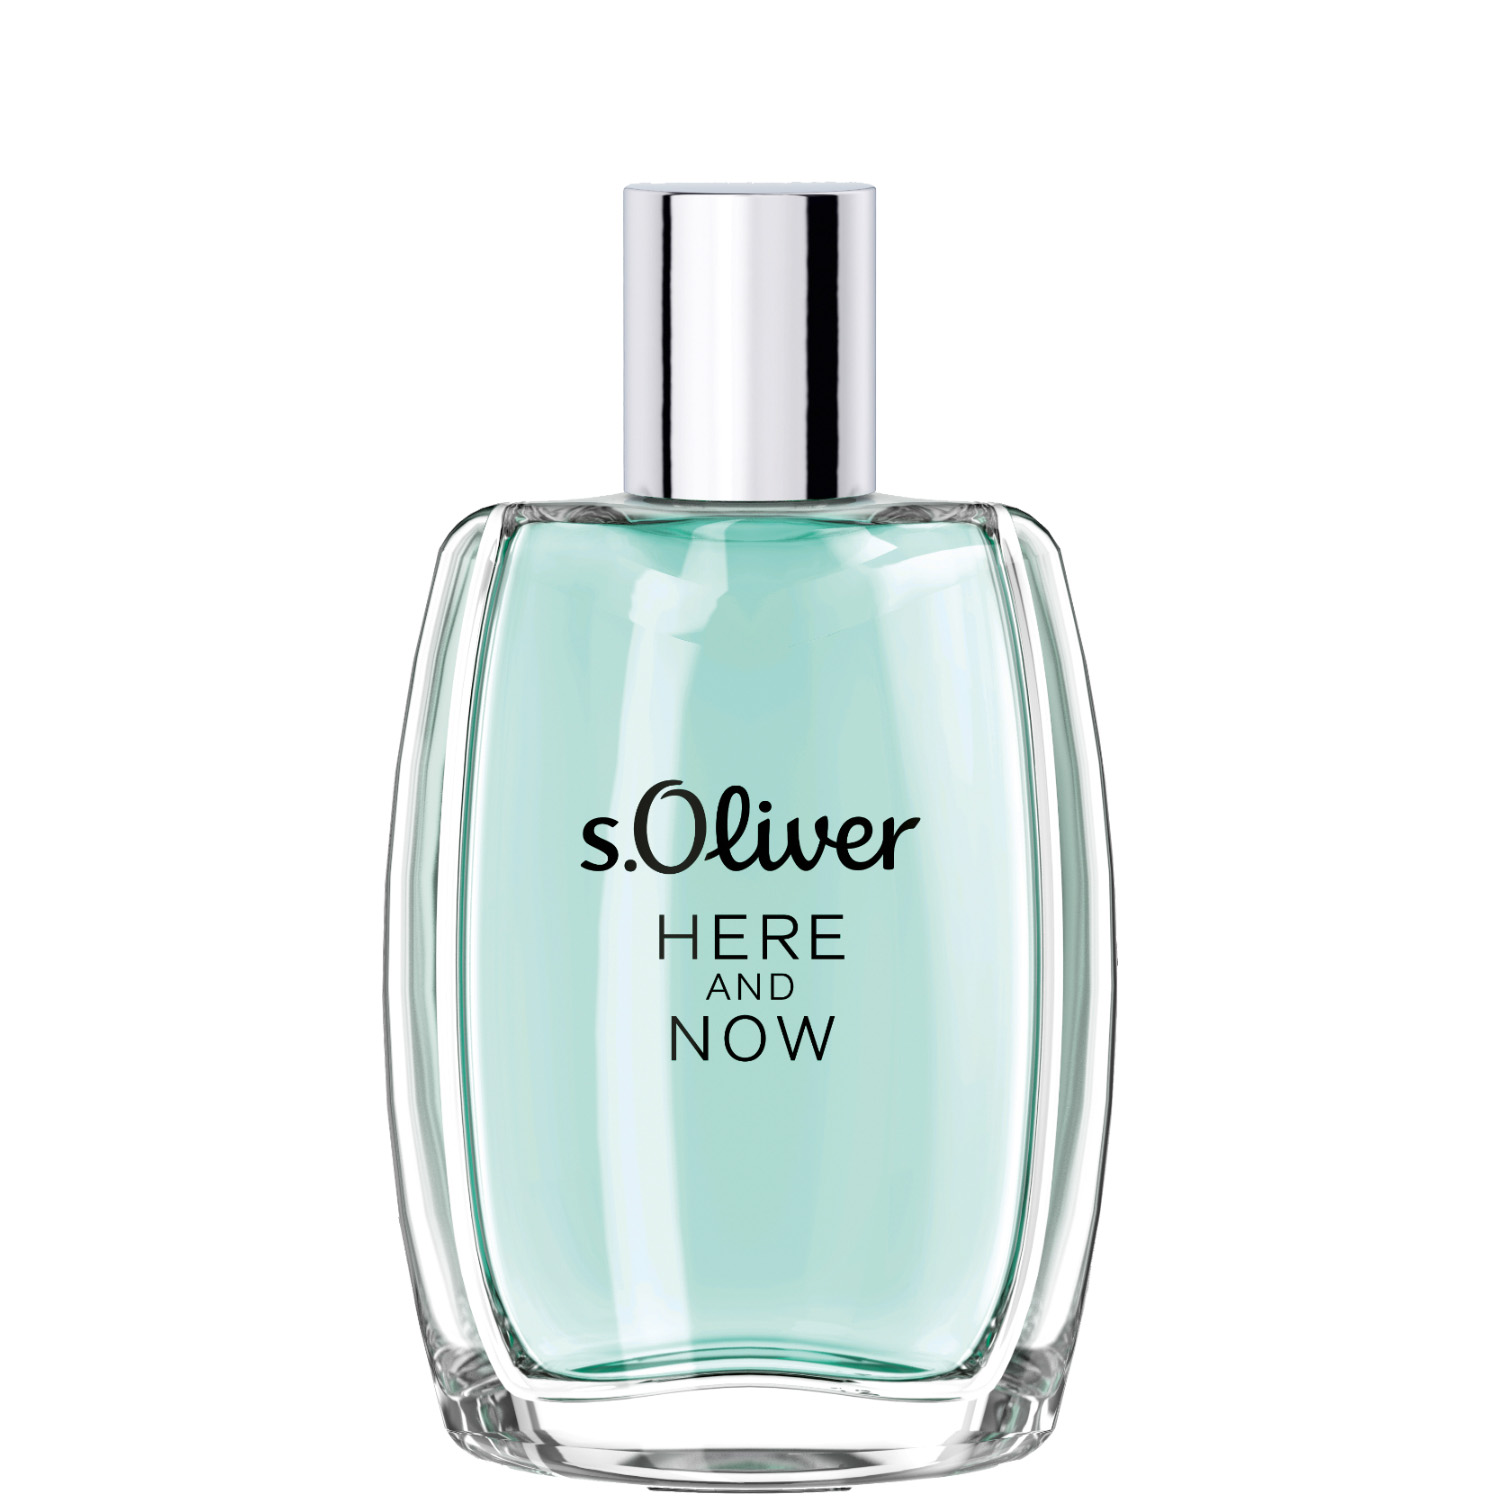 S.Oliver Here And Now Men After Shave Spray 50ml